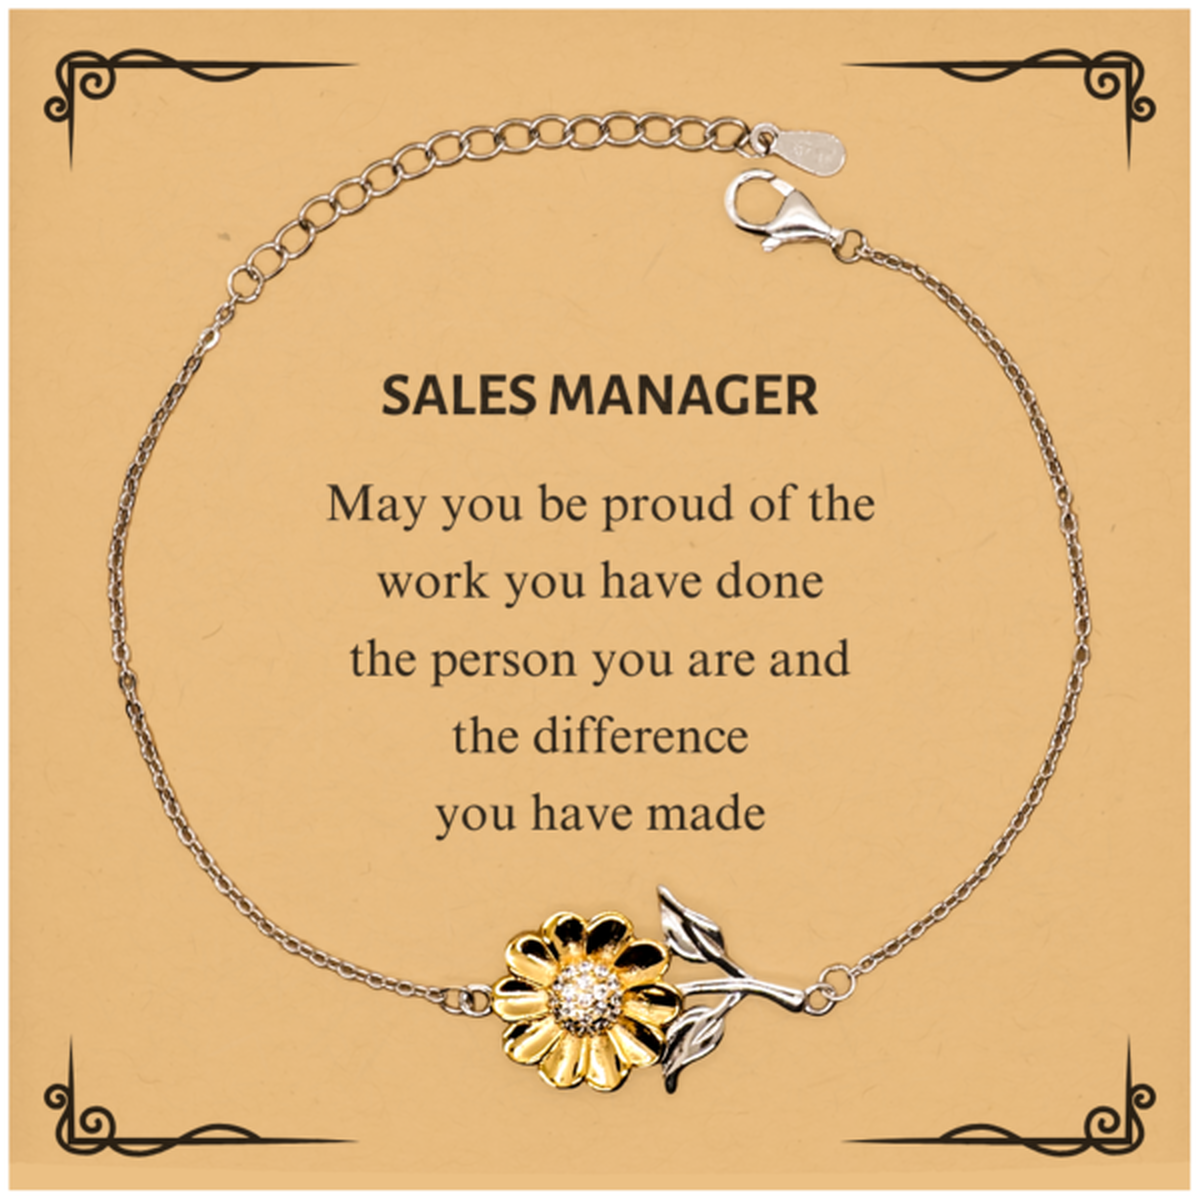 Sales Manager May you be proud of the work you have done, Retirement Sales Manager Sunflower Bracelet for Colleague Appreciation Gifts Amazing for Sales Manager